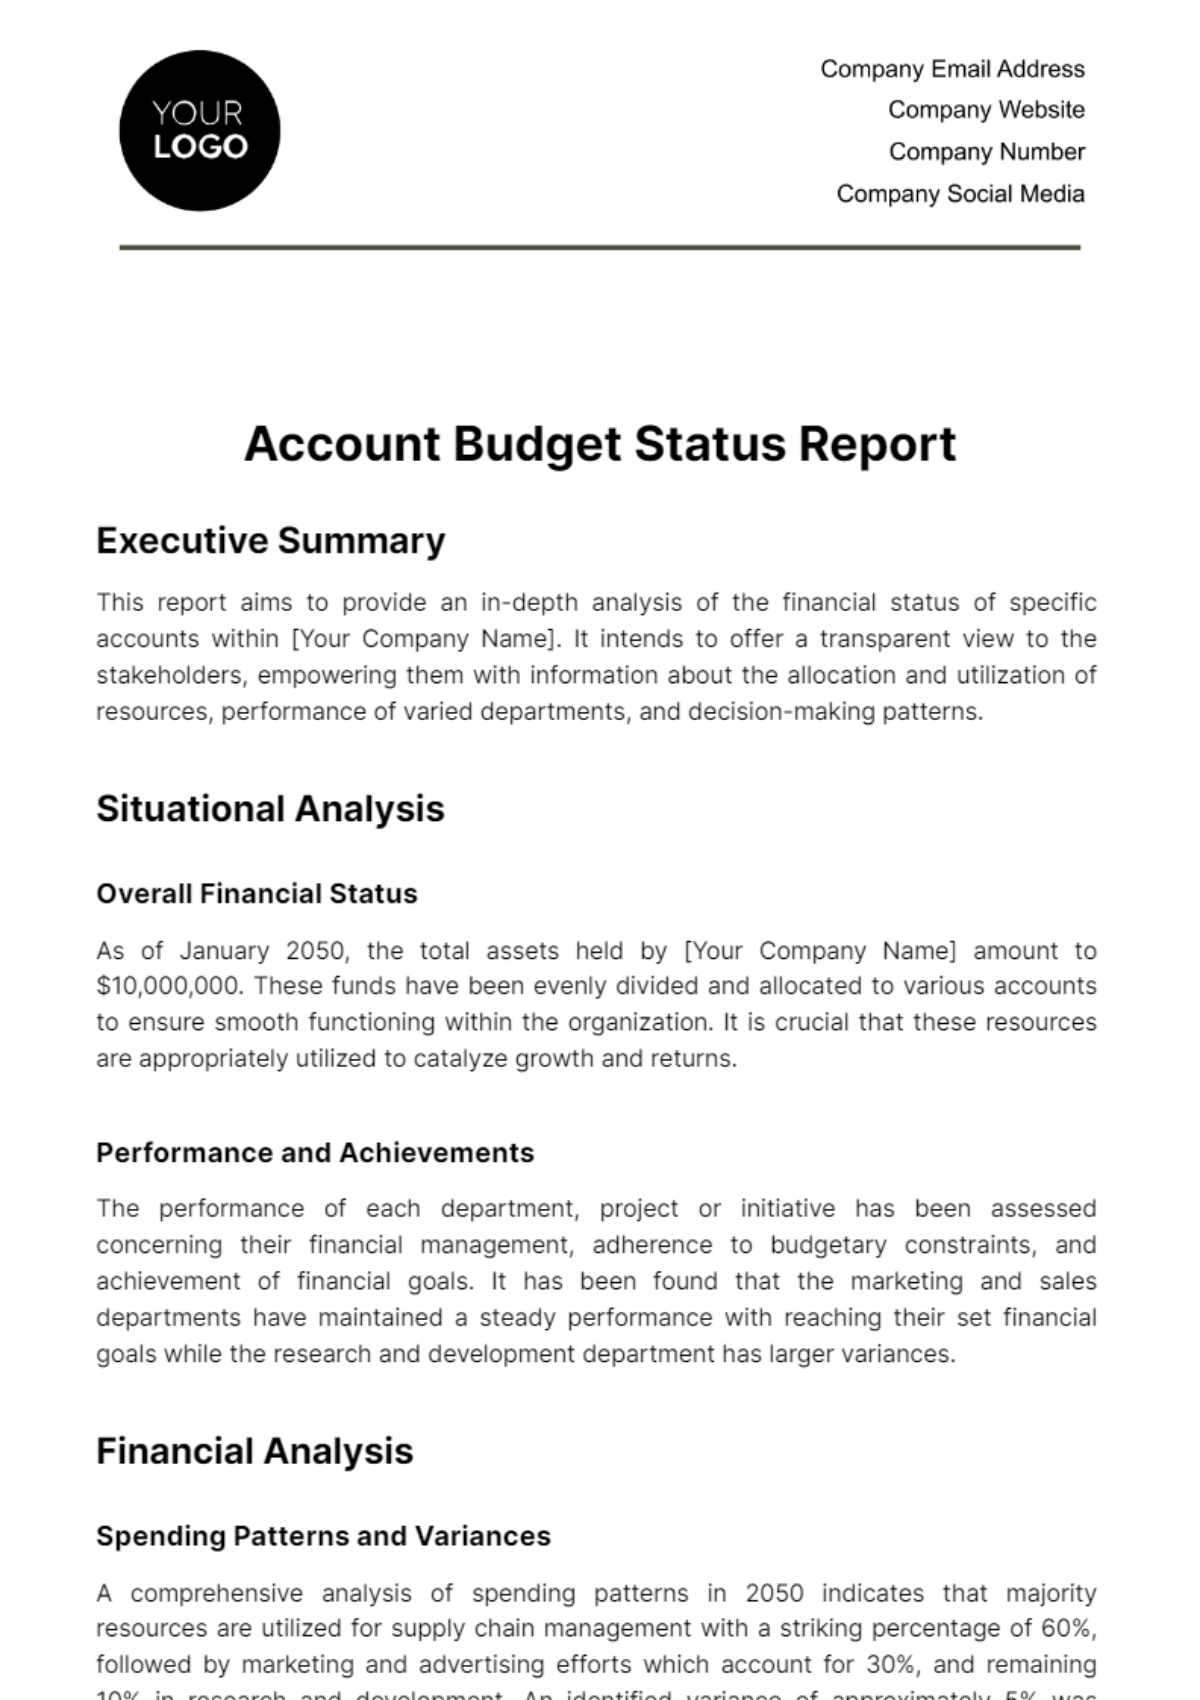 Free Account Budget Status Report Template